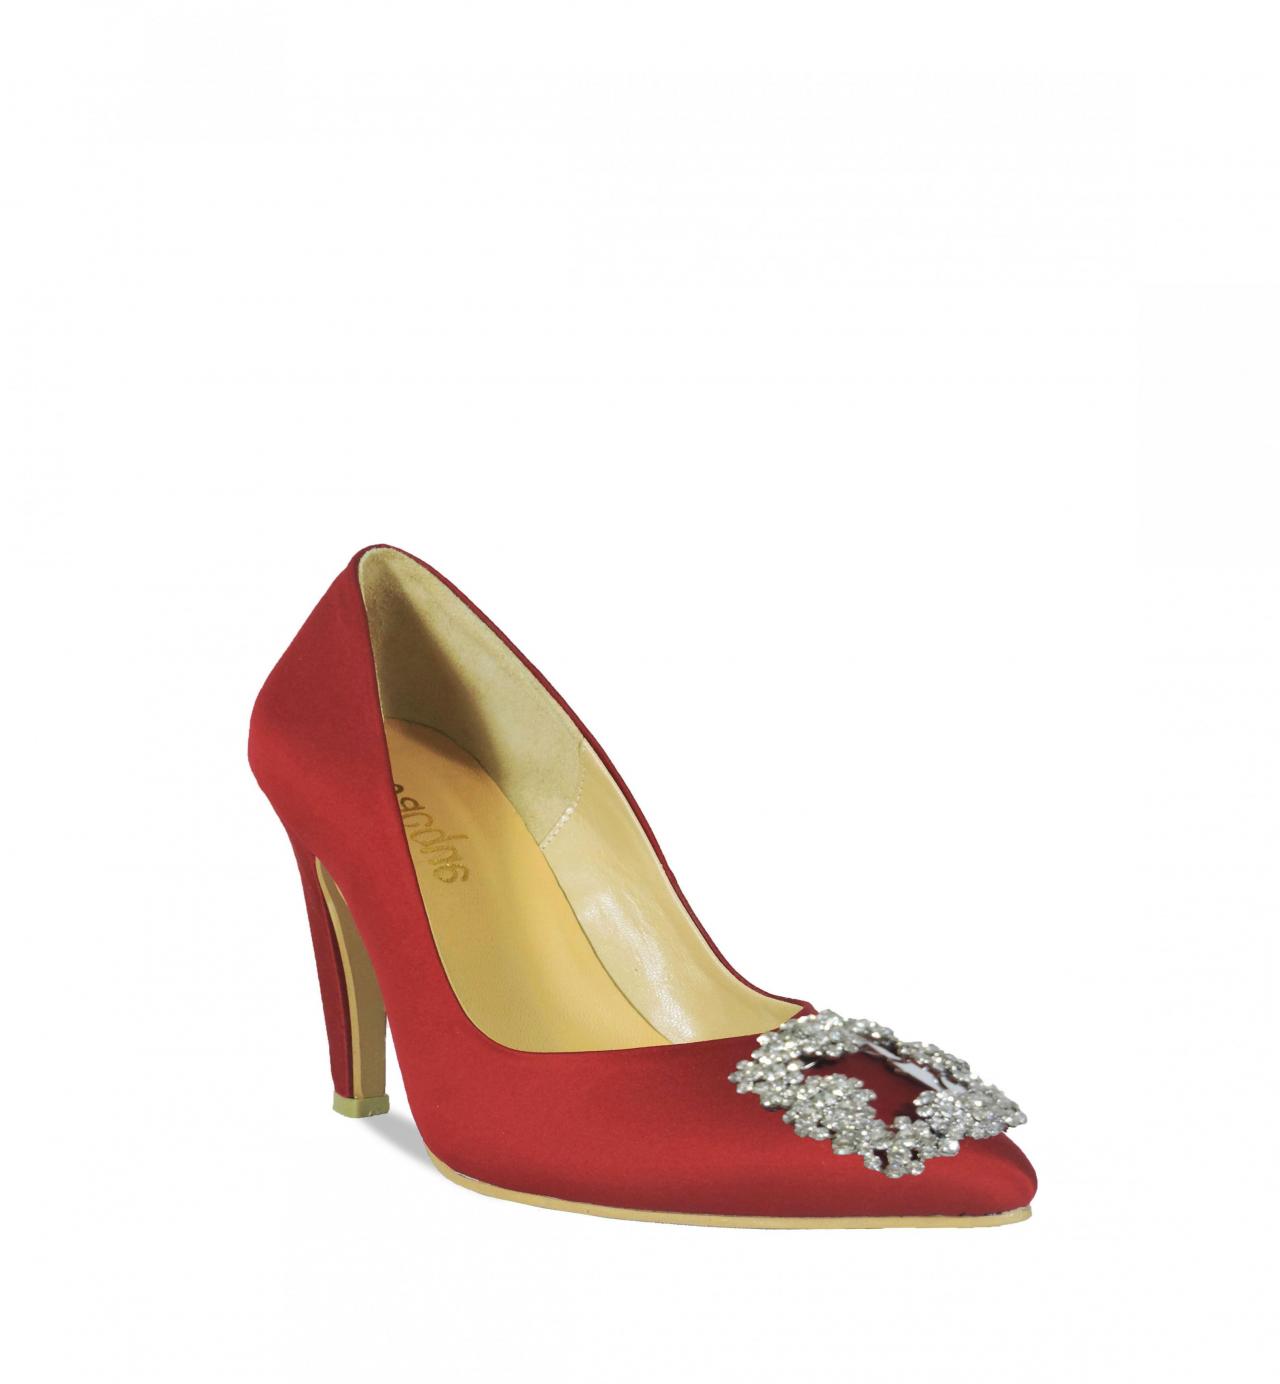 Jacquelee Audrey Ruby Red Heel With Ova Buckle on Luulla